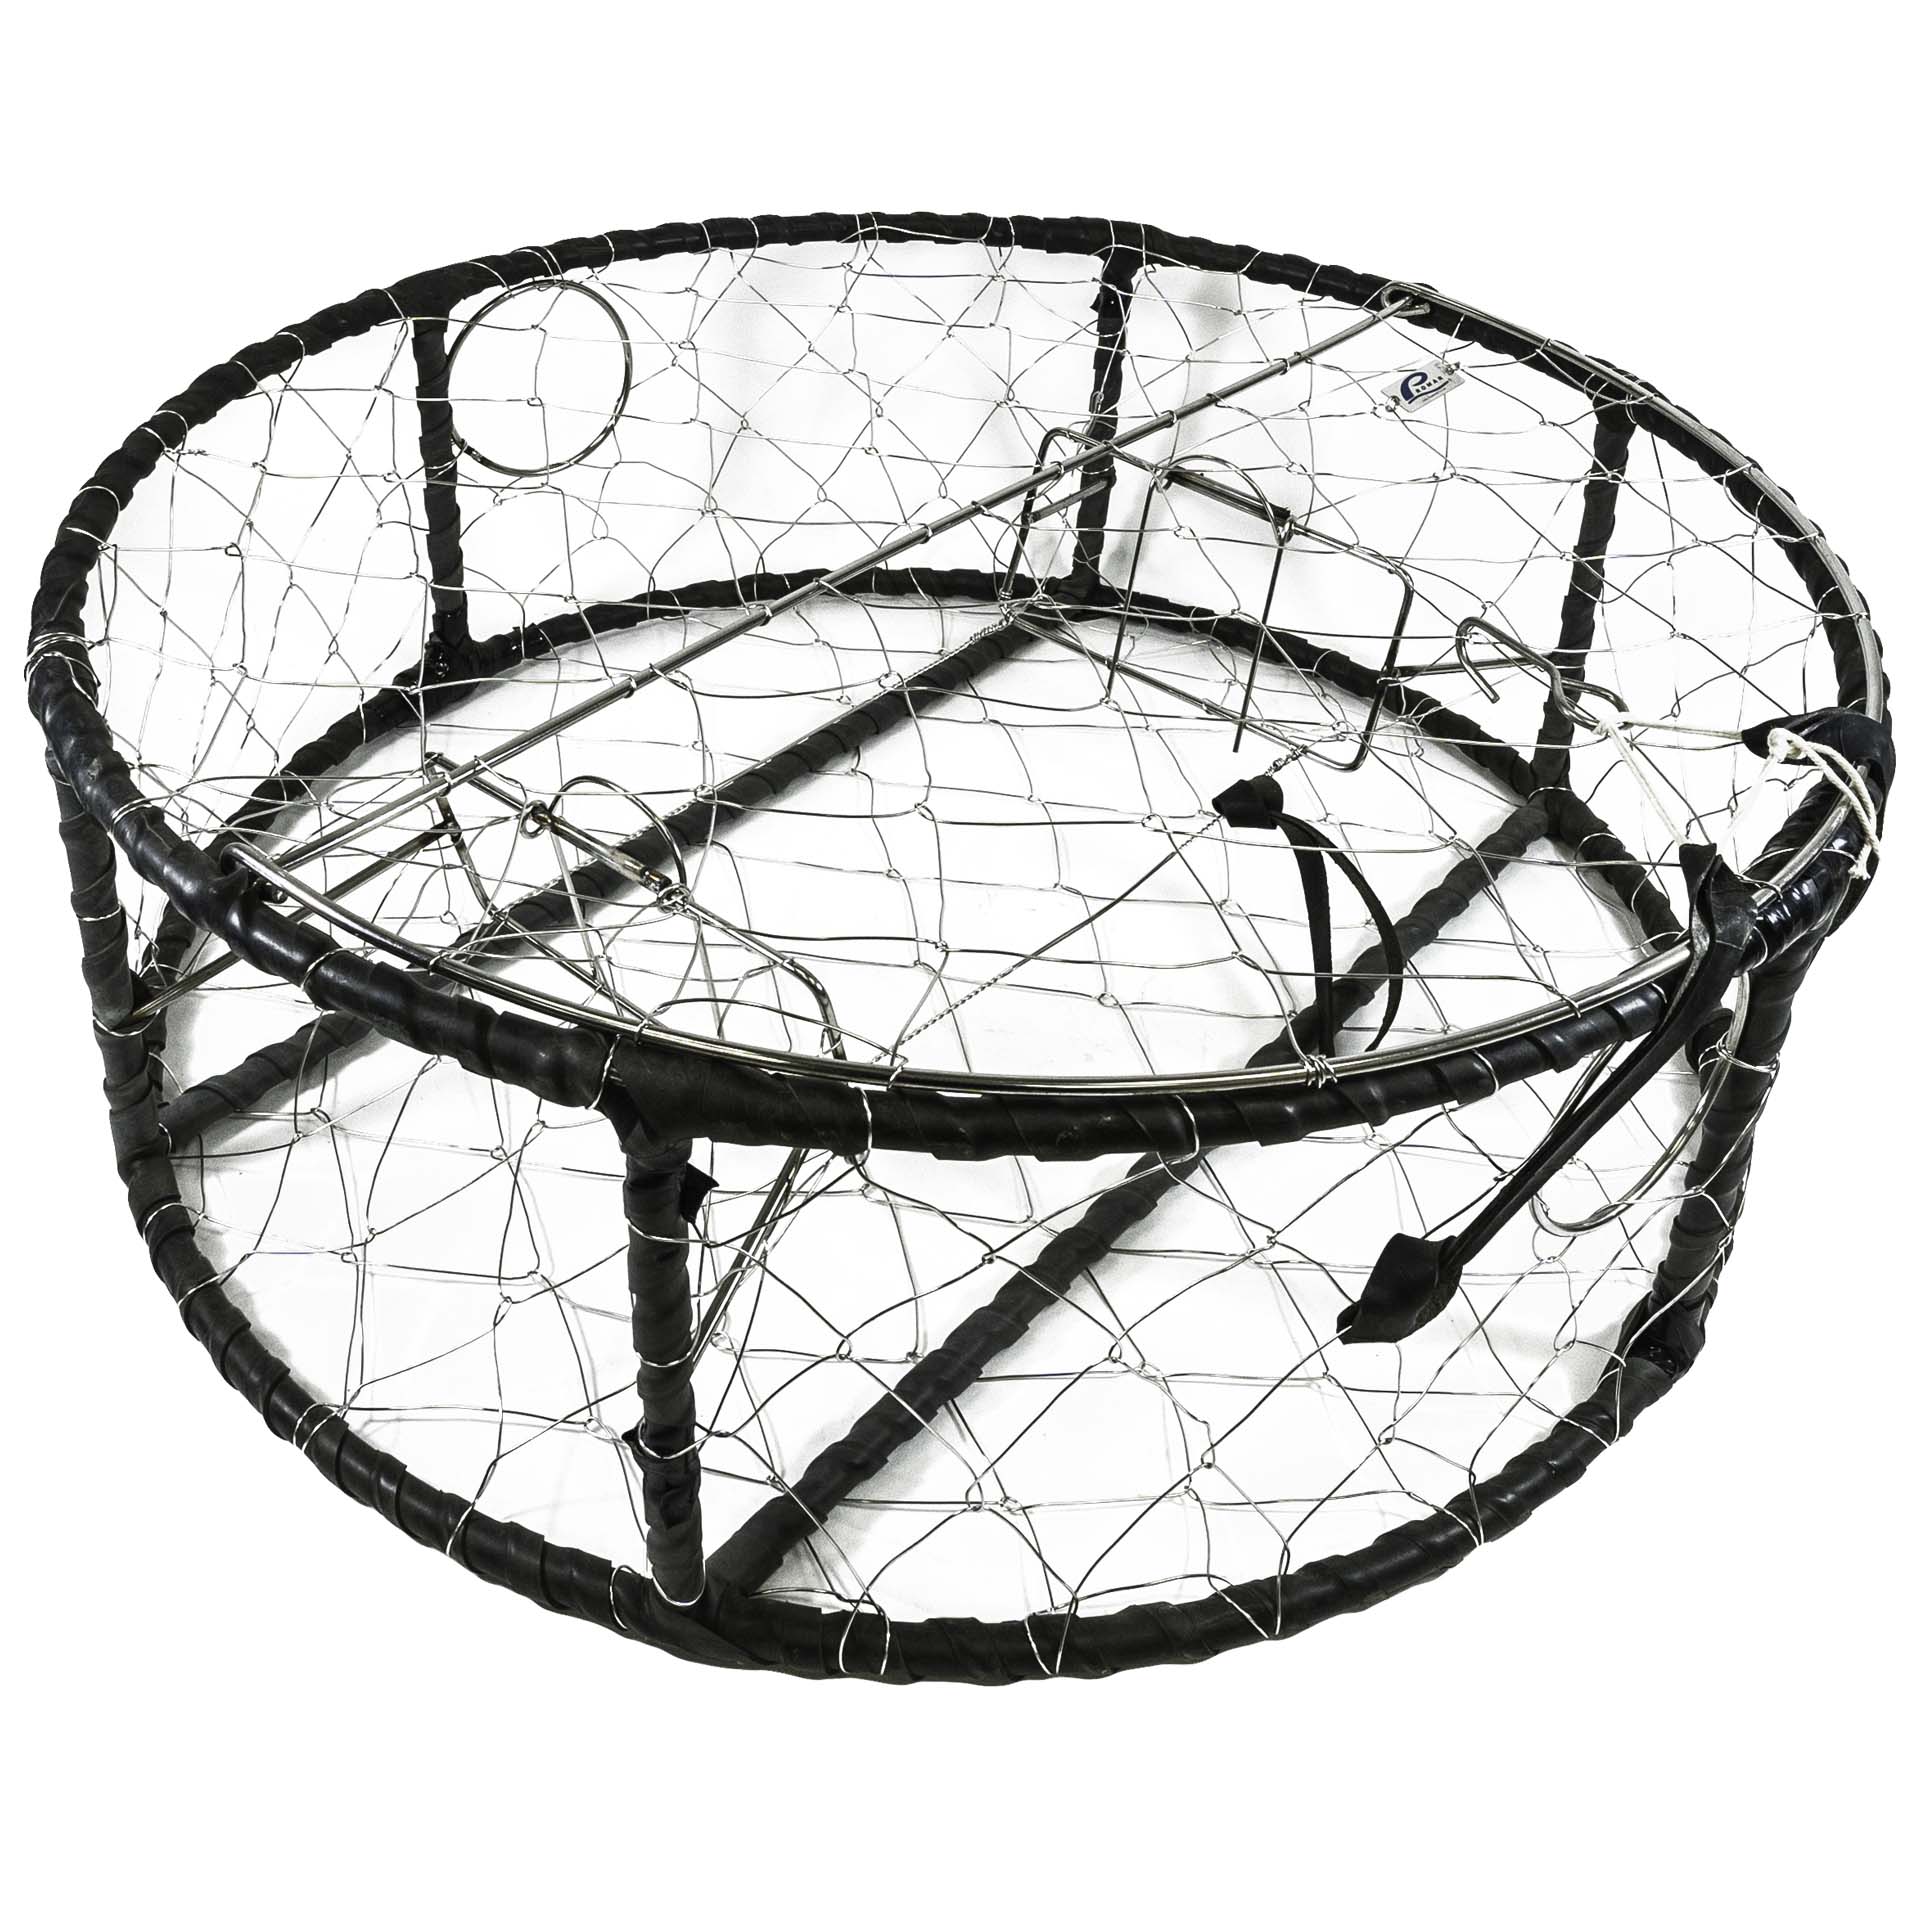 STAINLESS STEEL CRAB POT 30" tr-830